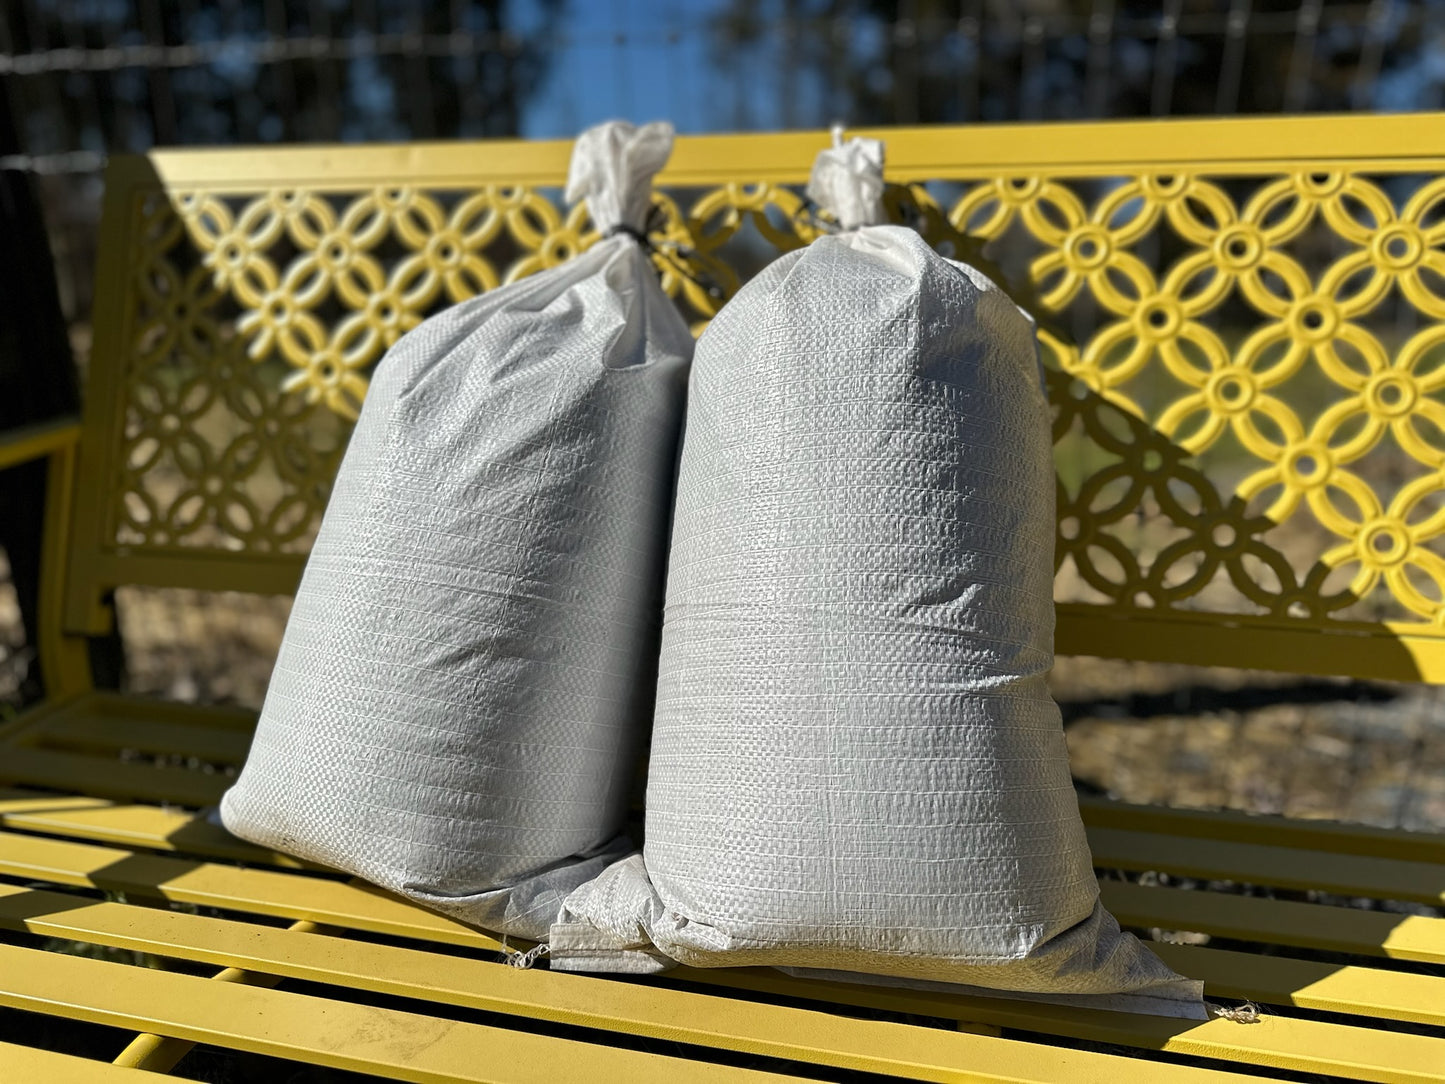 Bags of worm castings on a bench